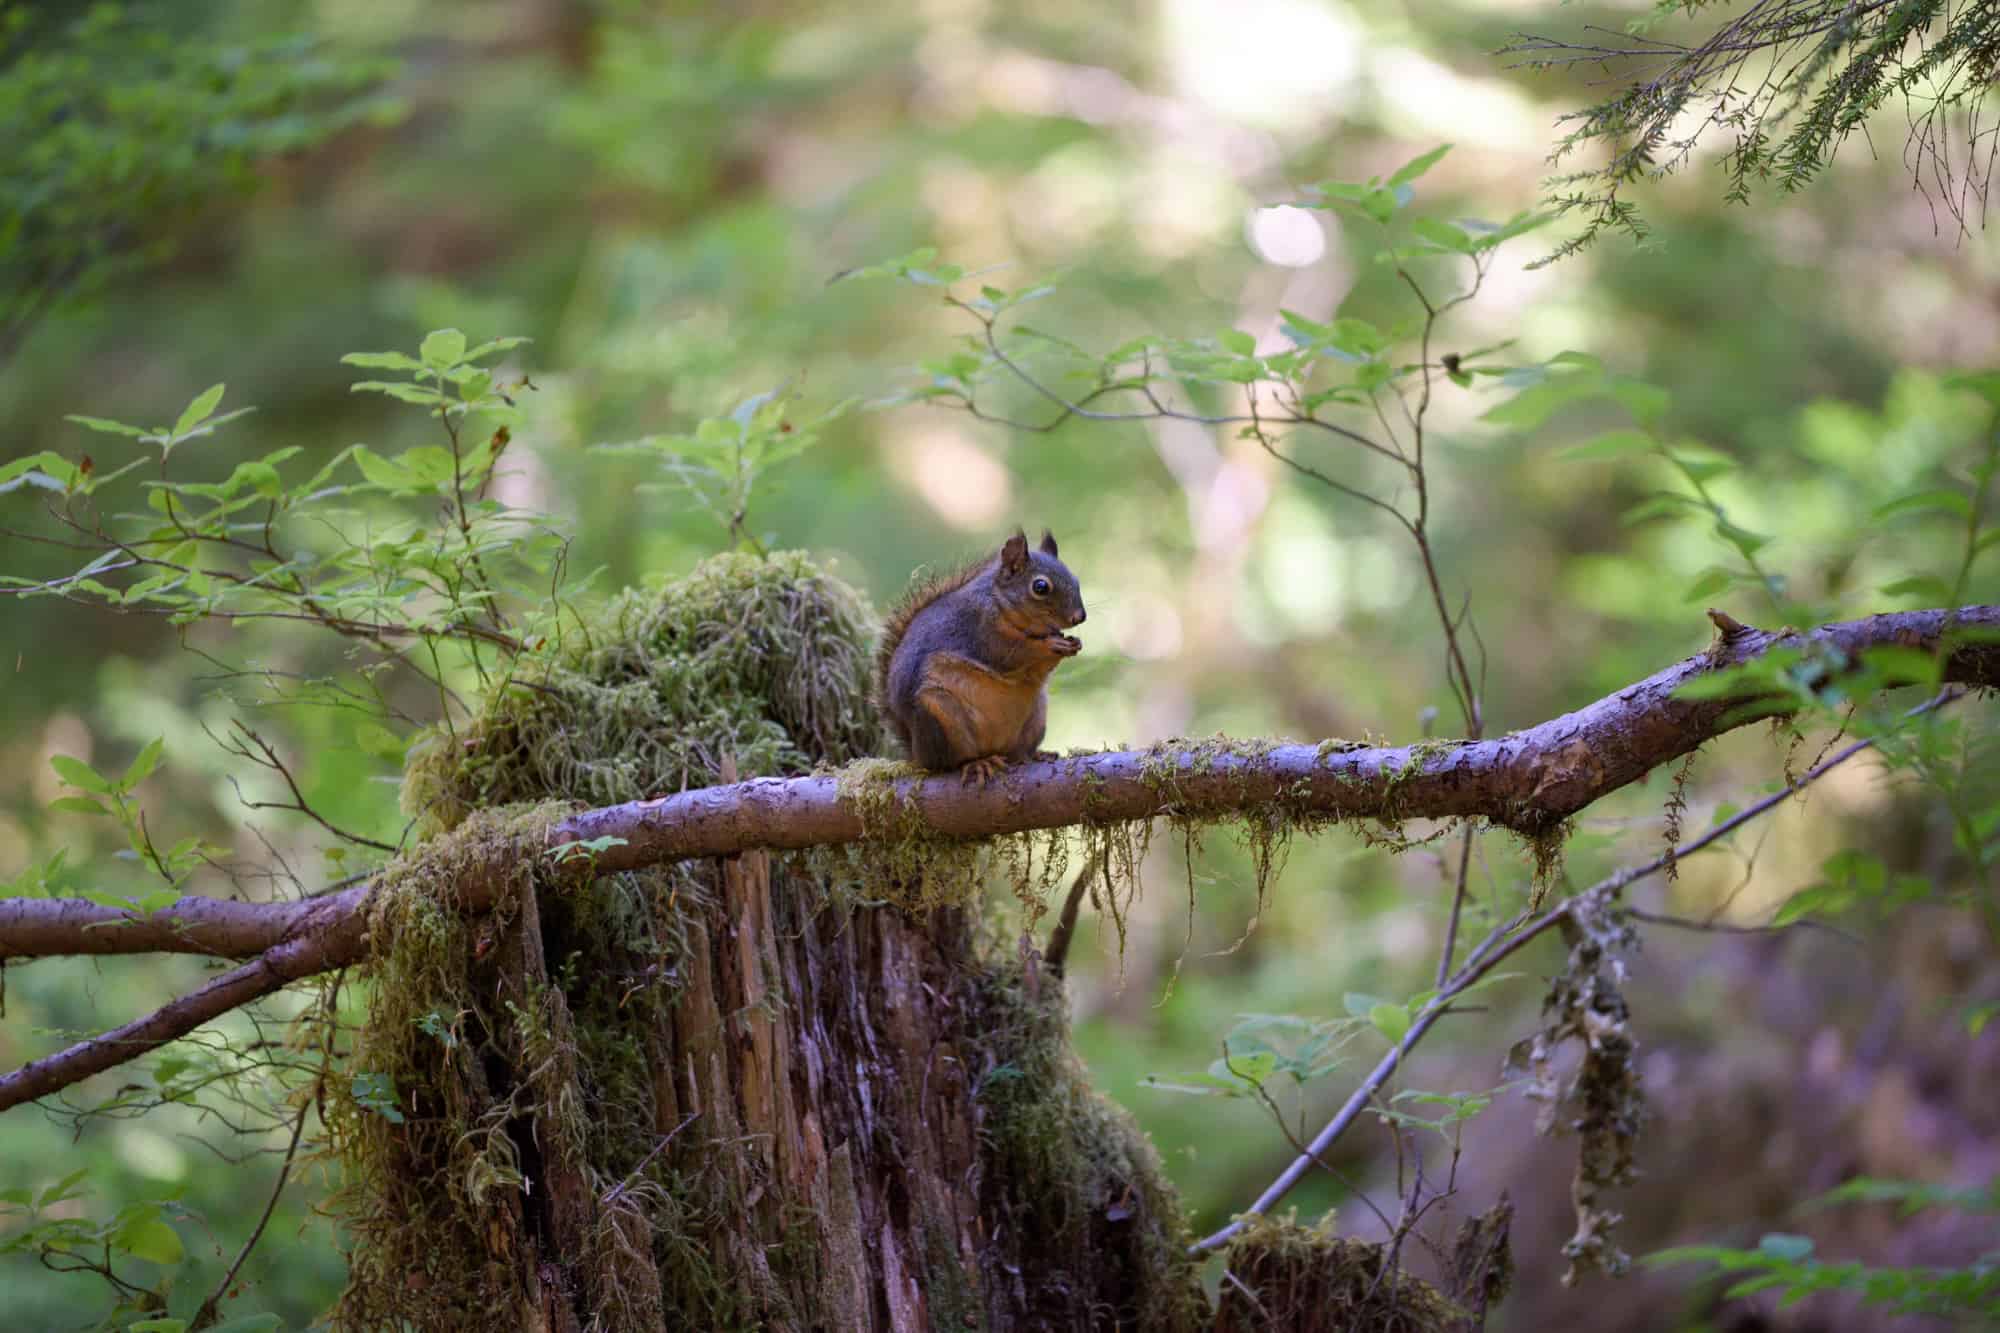 a squirrel sits on a branch surrounded by greenery